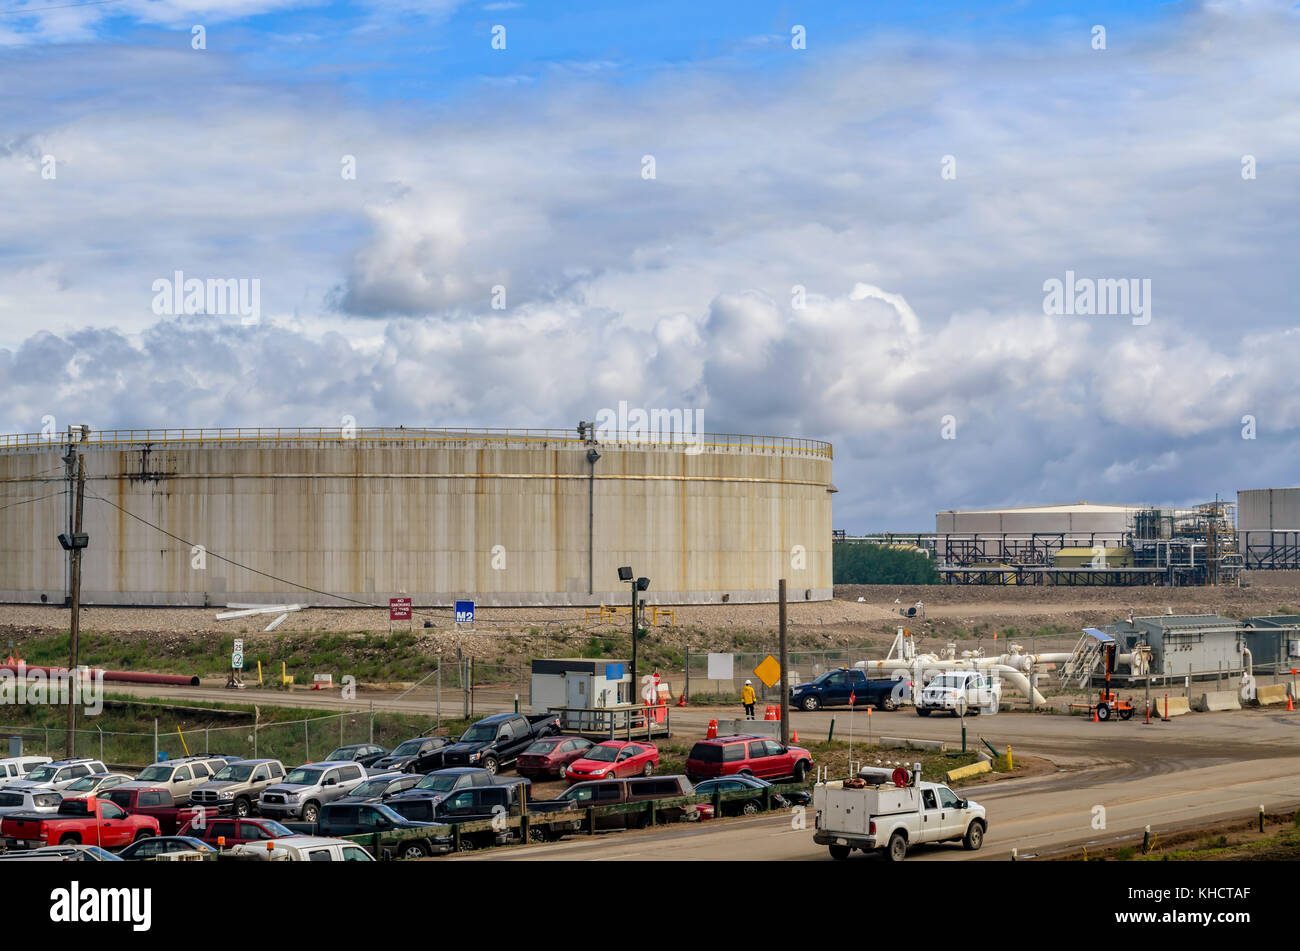 oil storage tanks and parking in the front, blue sky and clouds Stock Photo